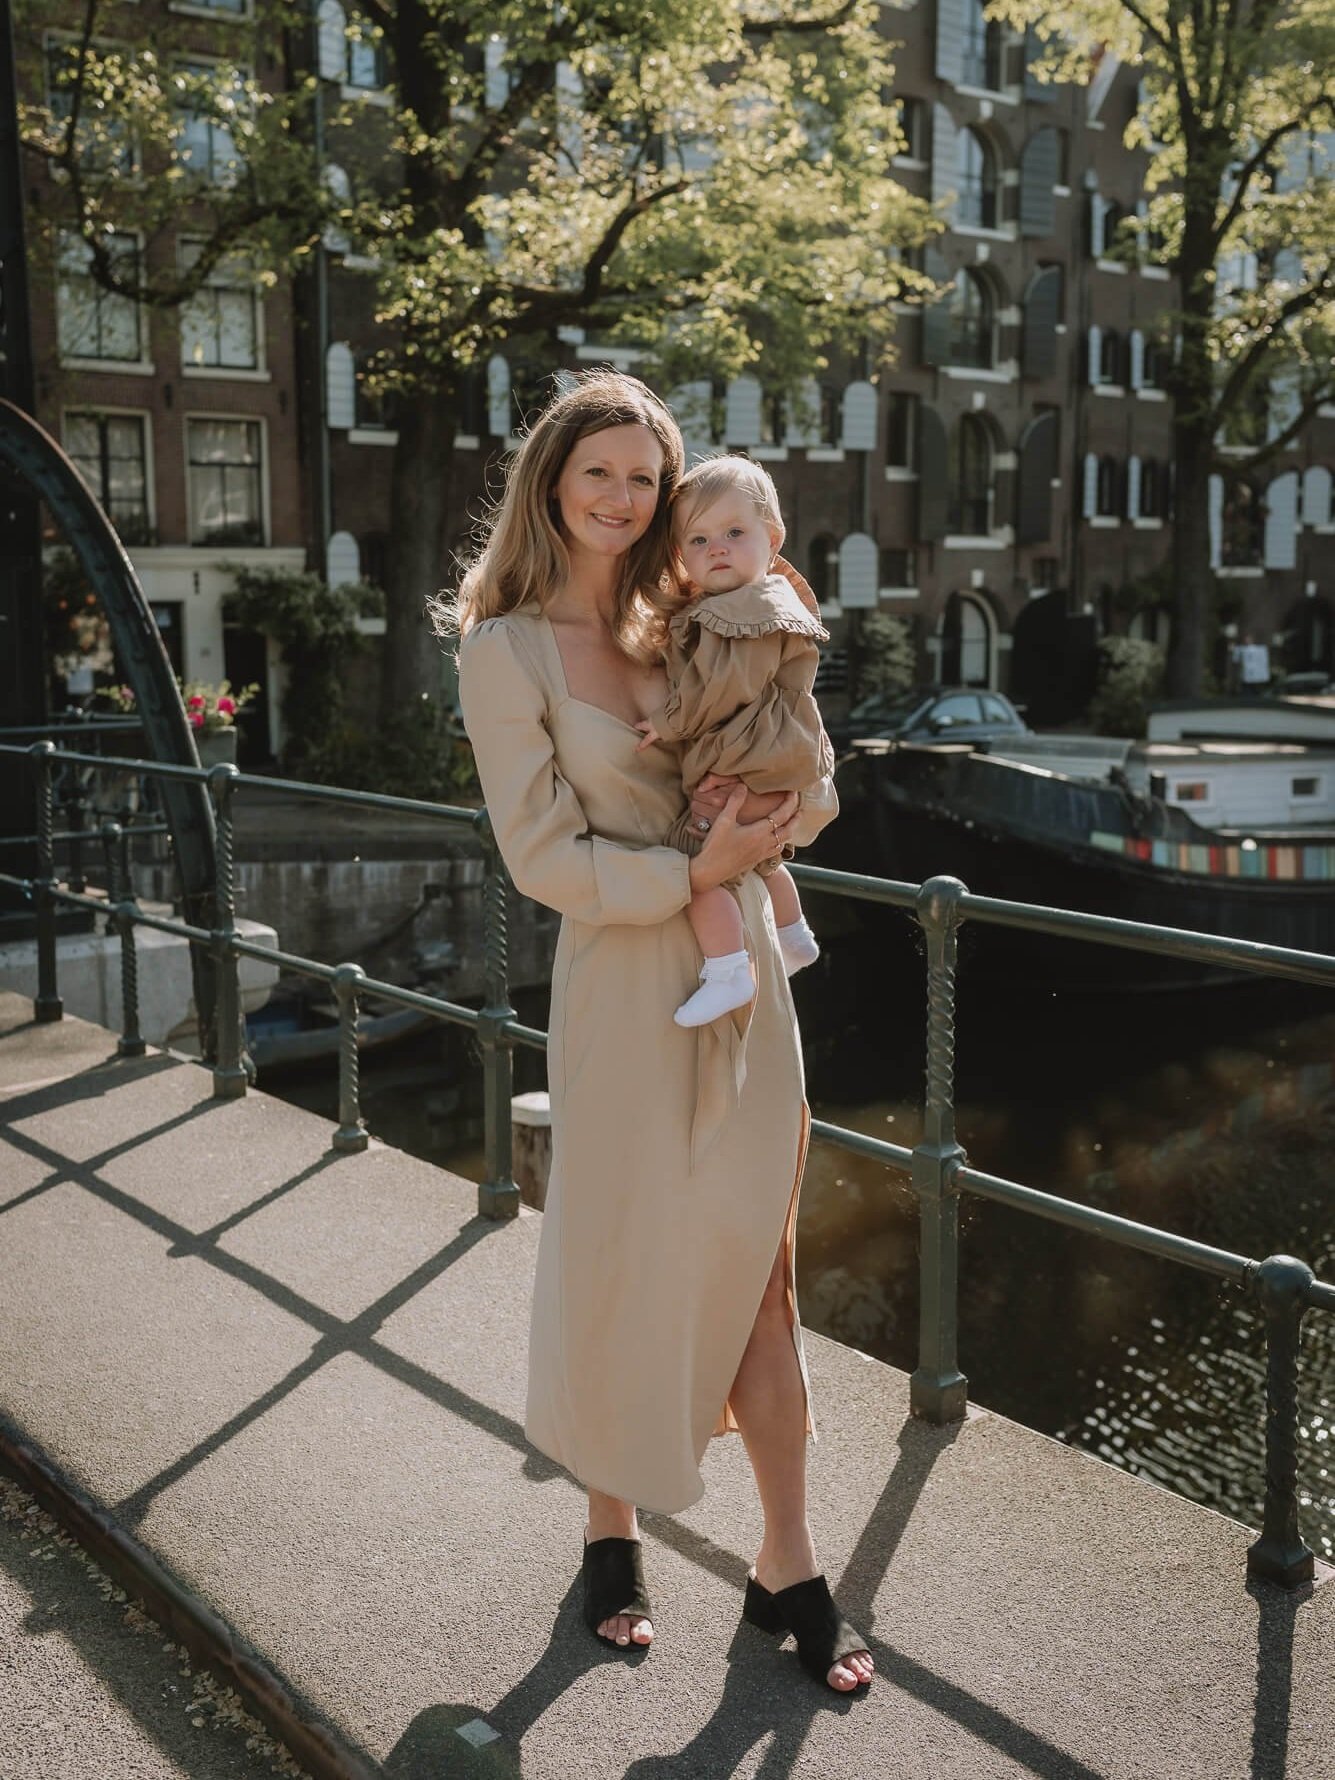 Family Photoshoot in Amsterdam, the Netherlands by Vicky McLachlan Photography